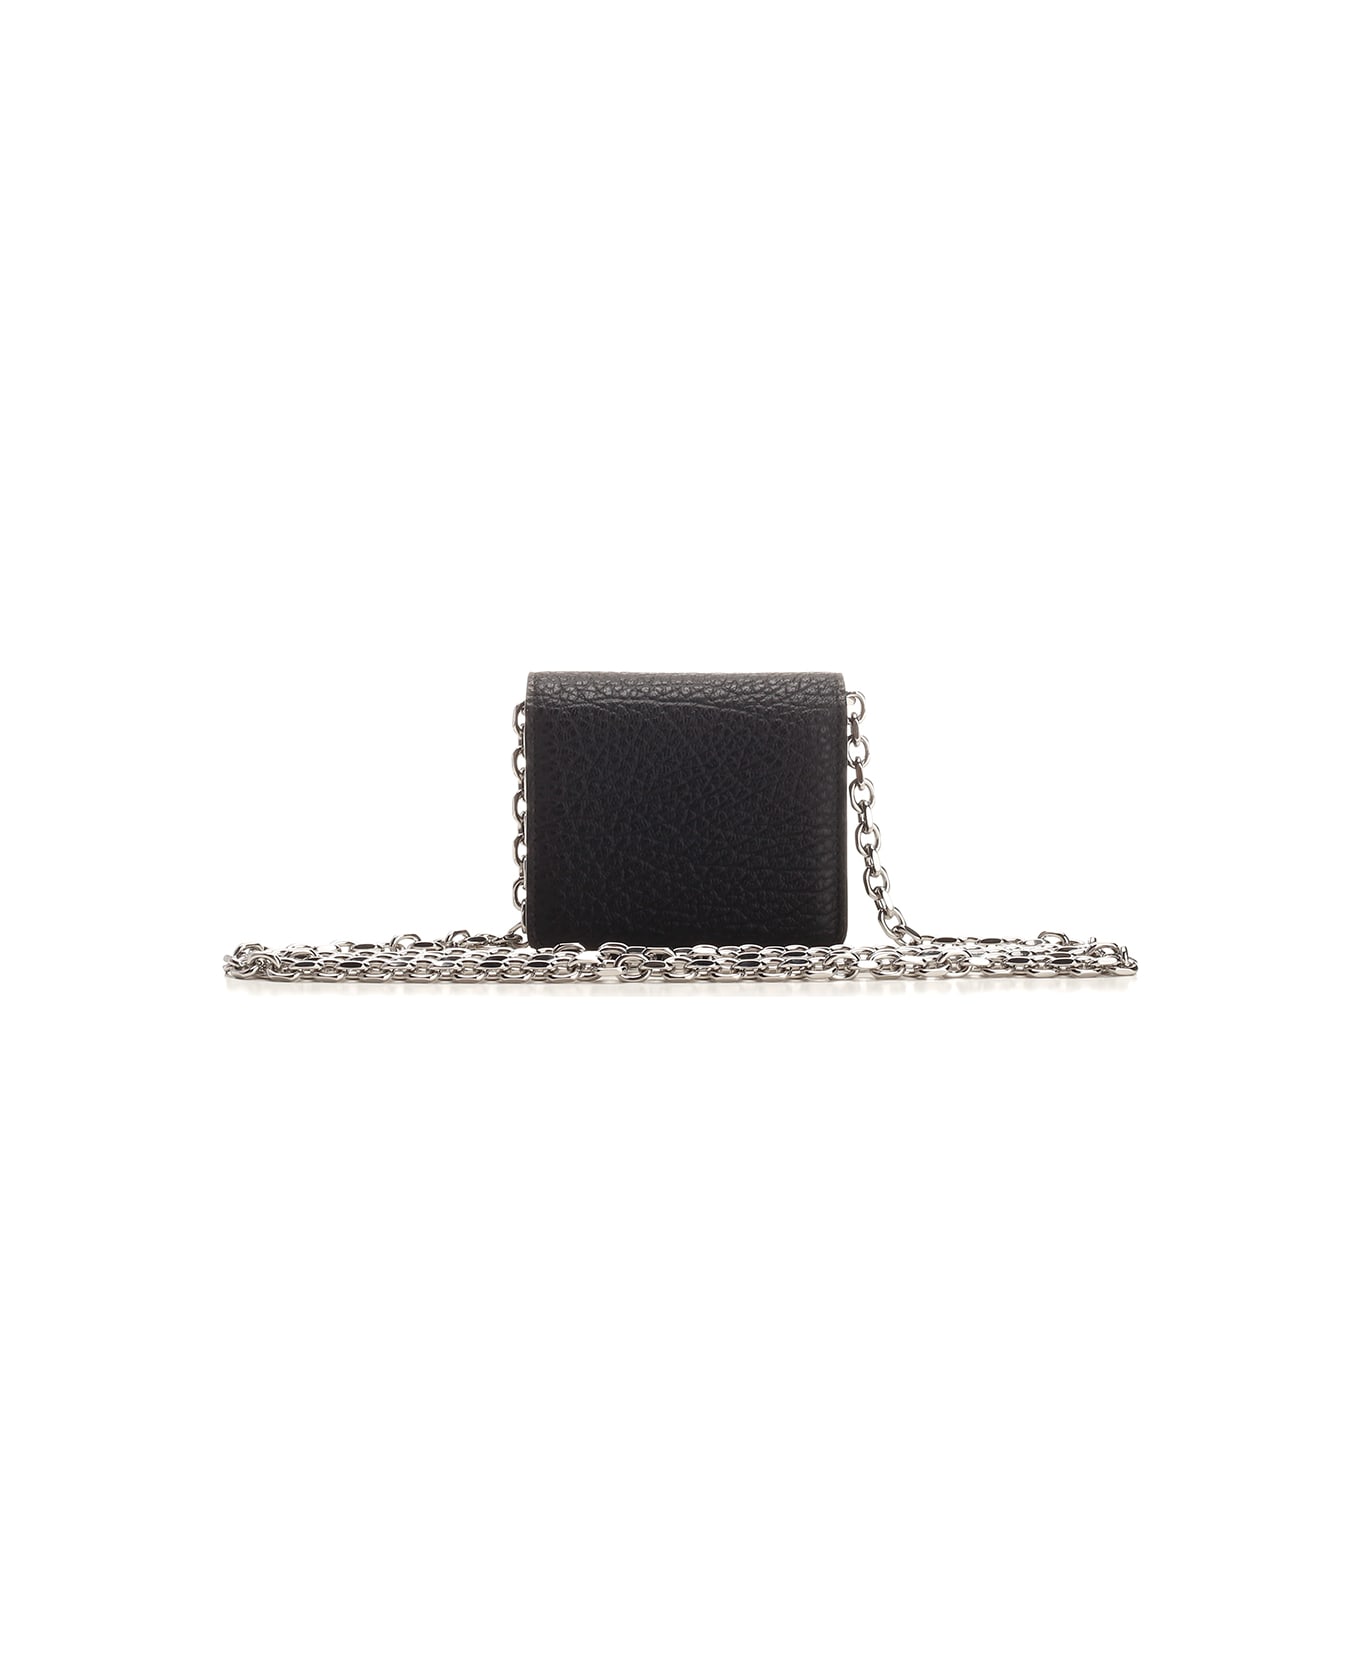 Maison Margiela Small Wallet With Chain Shoulder Strap - Nero